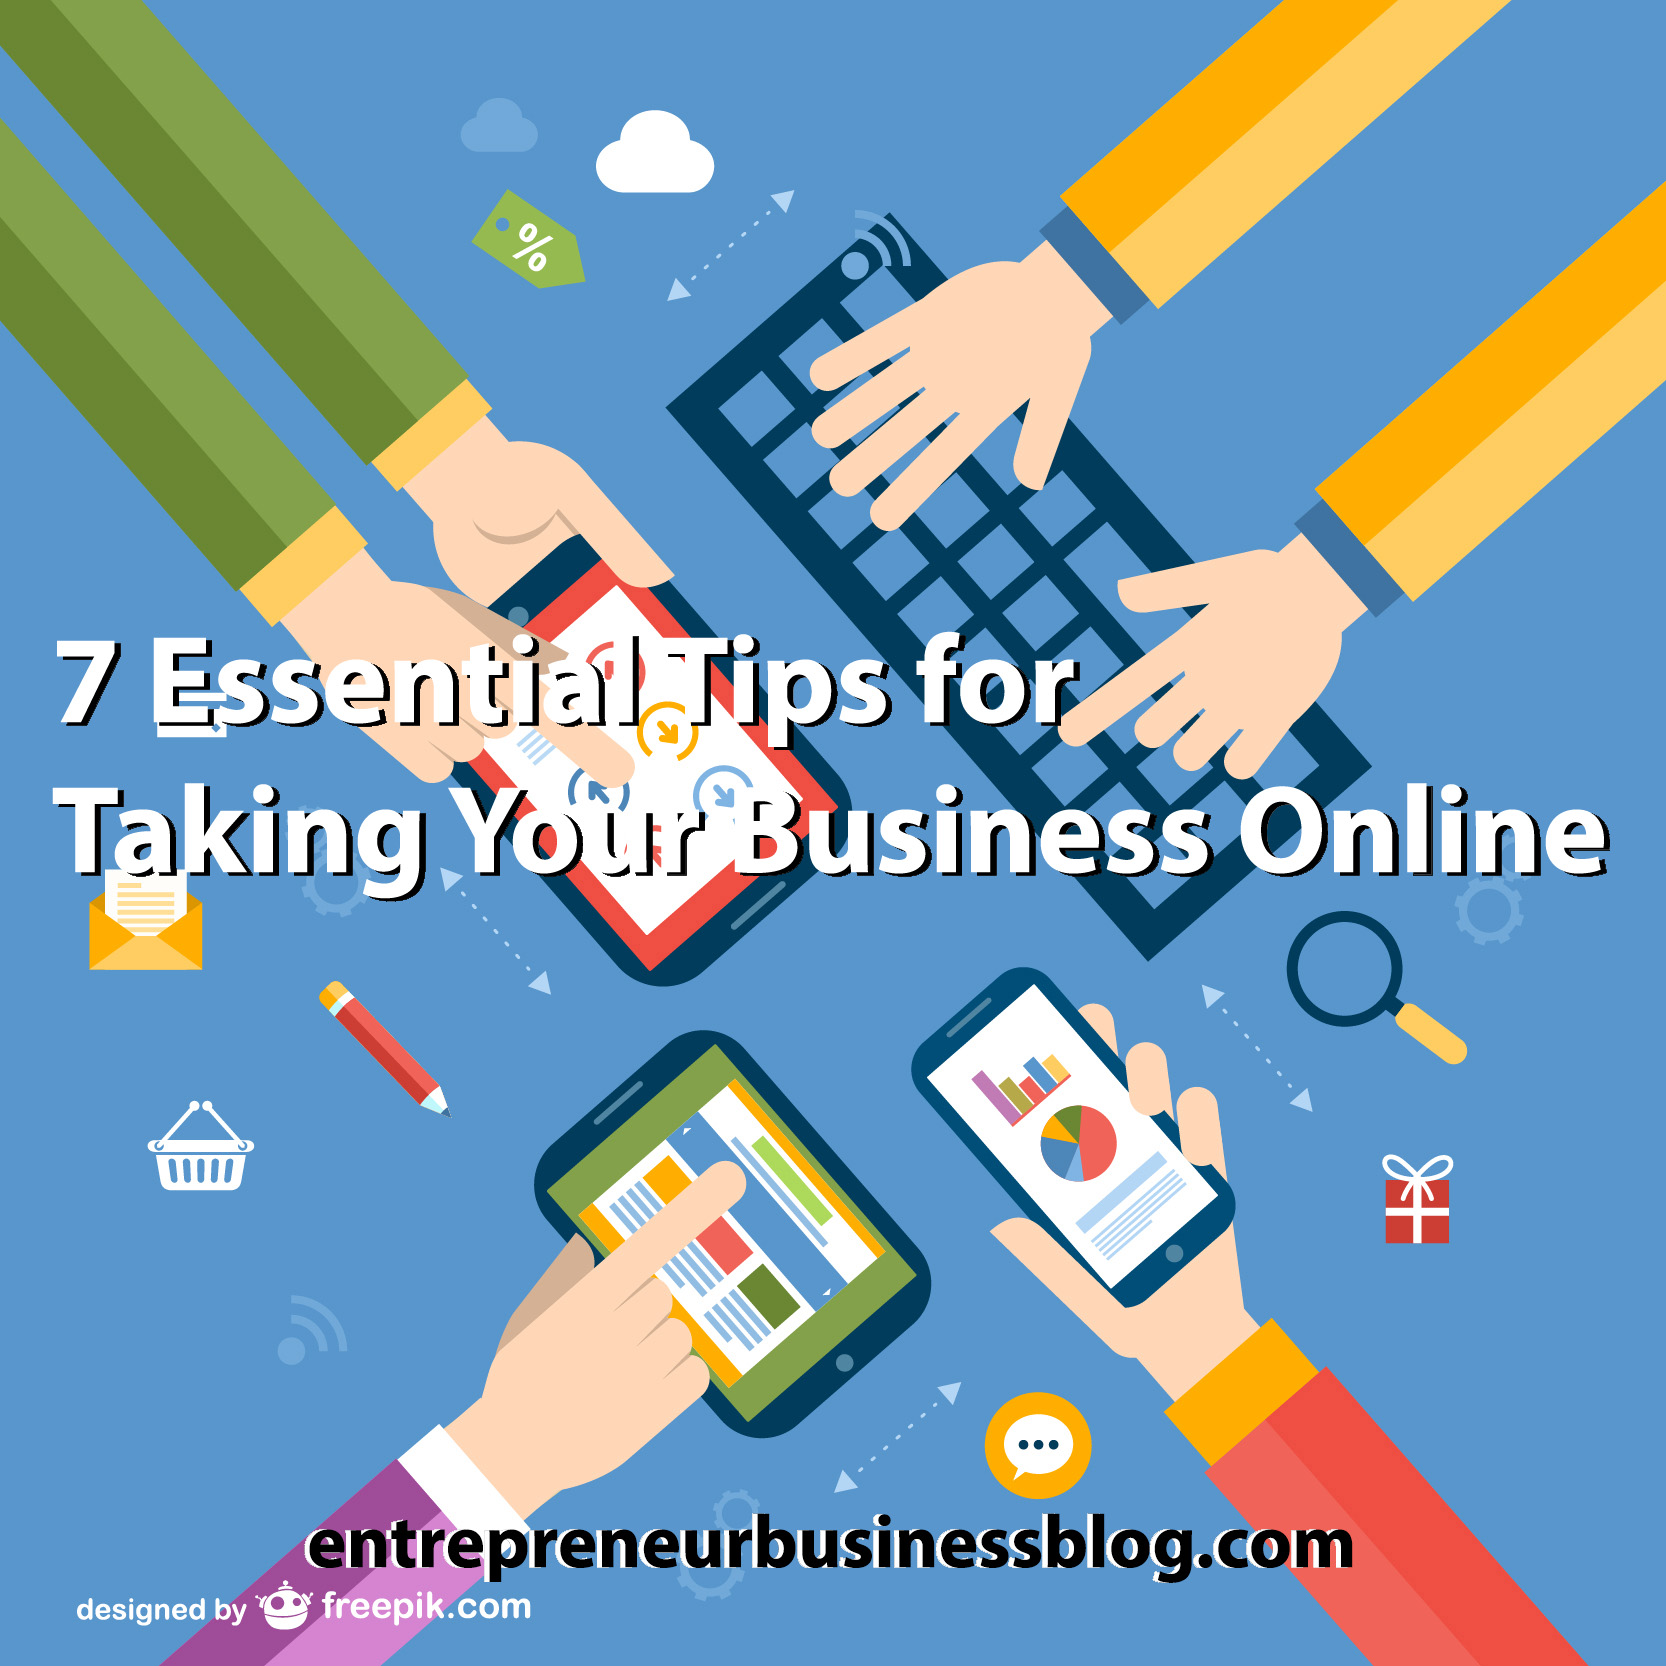 Essential tips for taking your business online